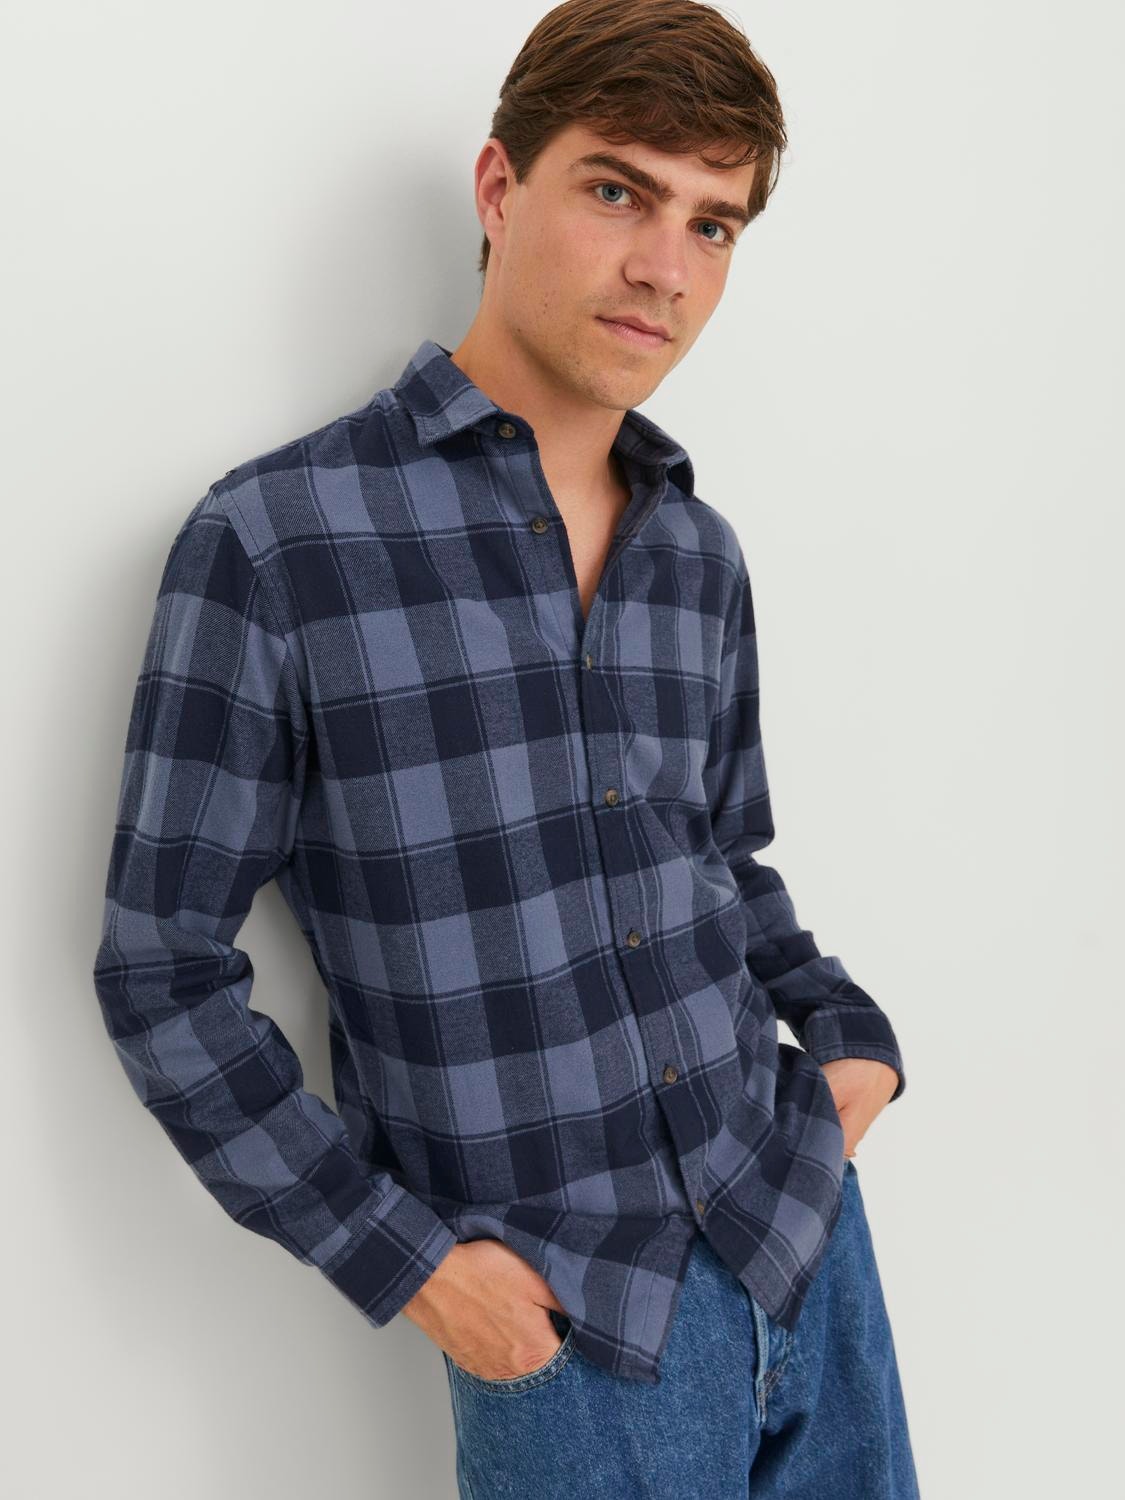 mens check shirt products for sale